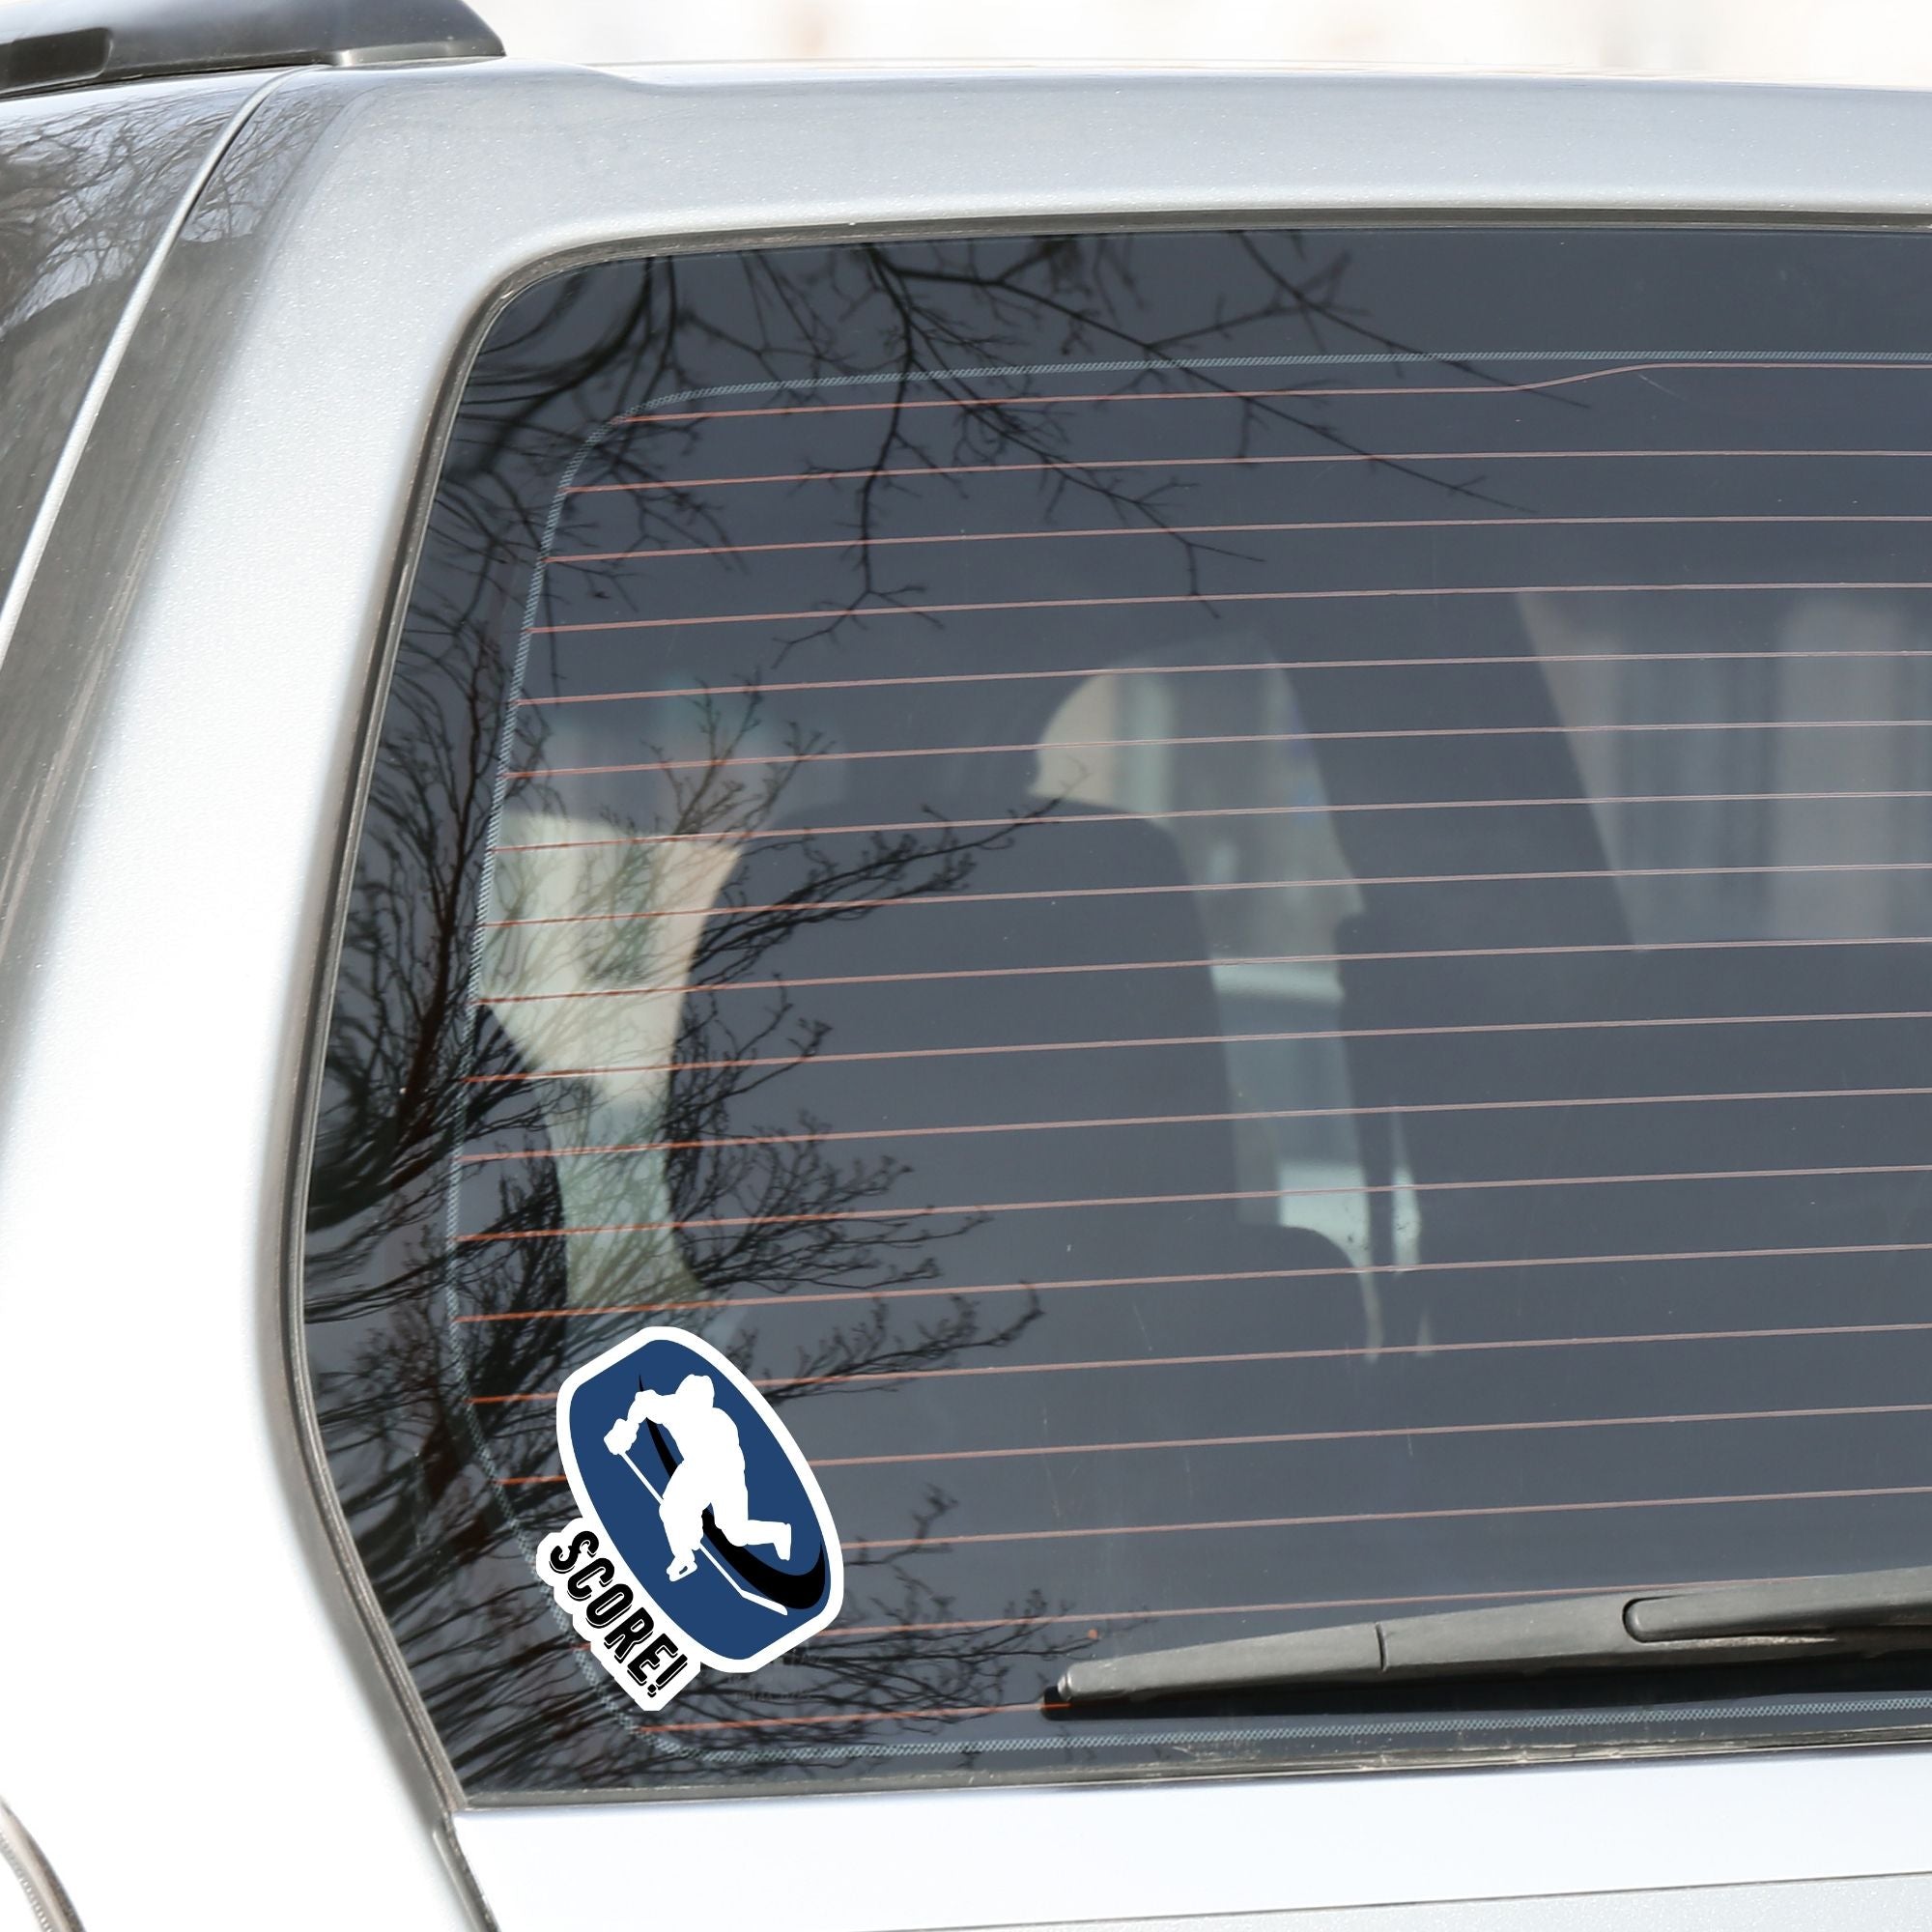 Grab your stick, lace up your skates, and head to the rink! This individual die-cut sticker features a hockey player silhouette on a blue hockey puck with the word "Score!" on the lower left side. This image shows the hockey sticker on the back window of a car.